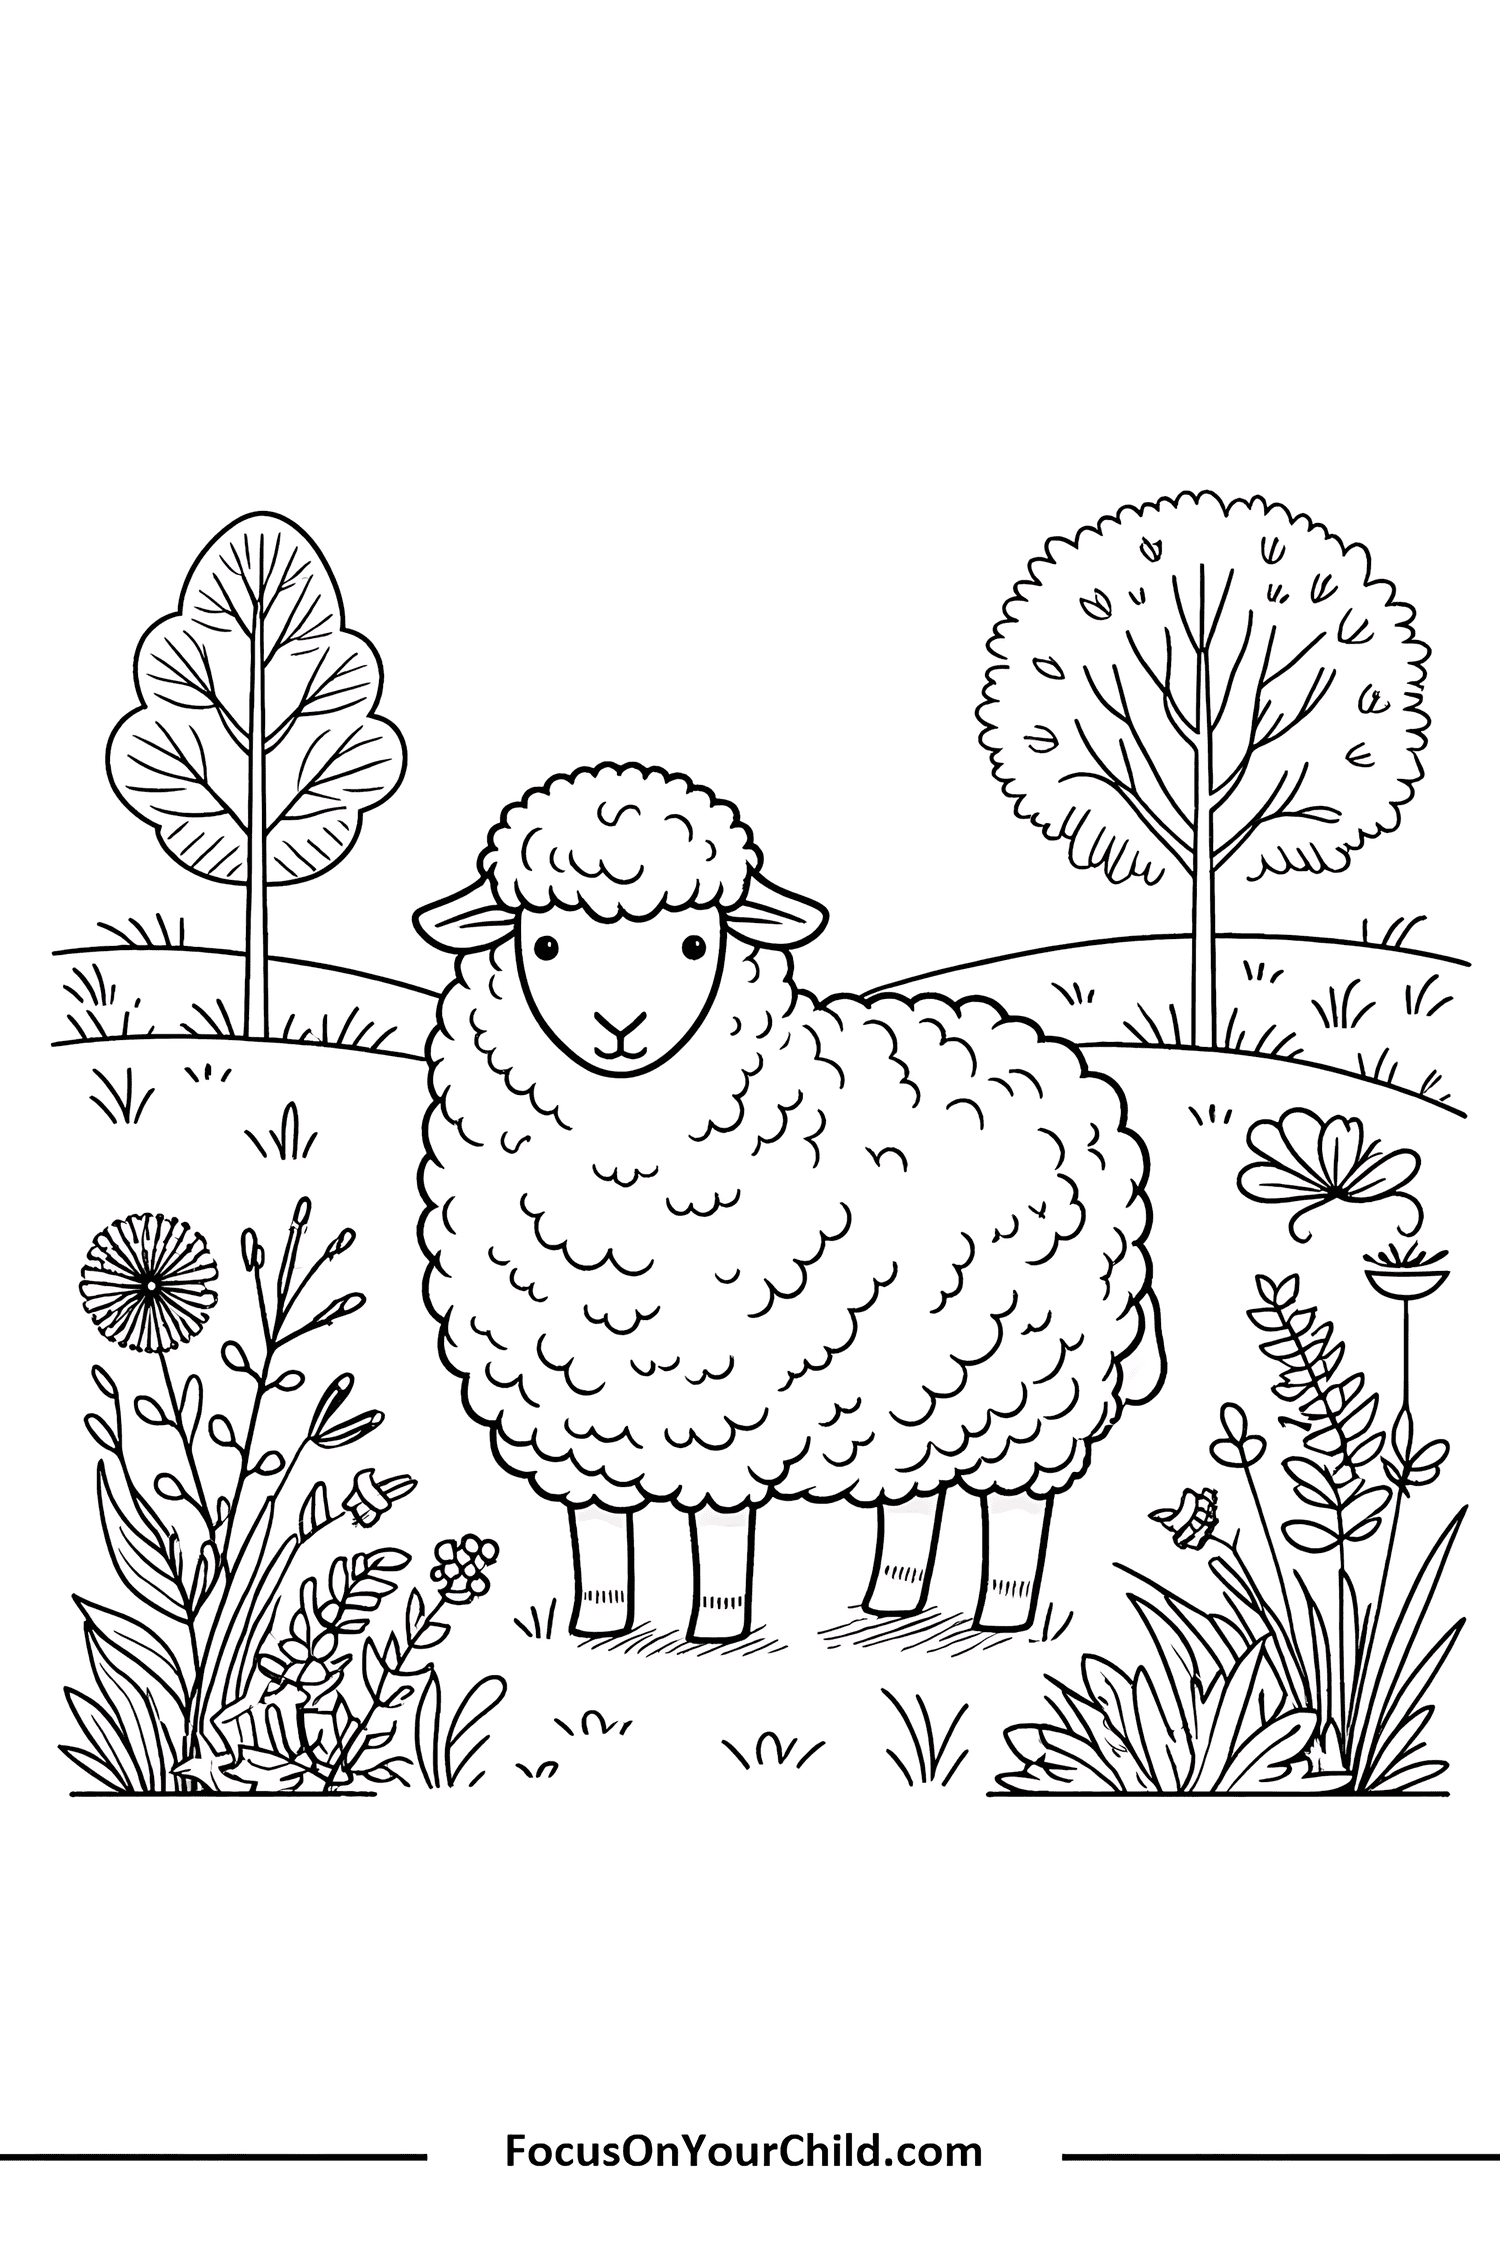 Detailed line drawing of a smiling sheep in a pastoral setting by FocusOnYourChild.com.